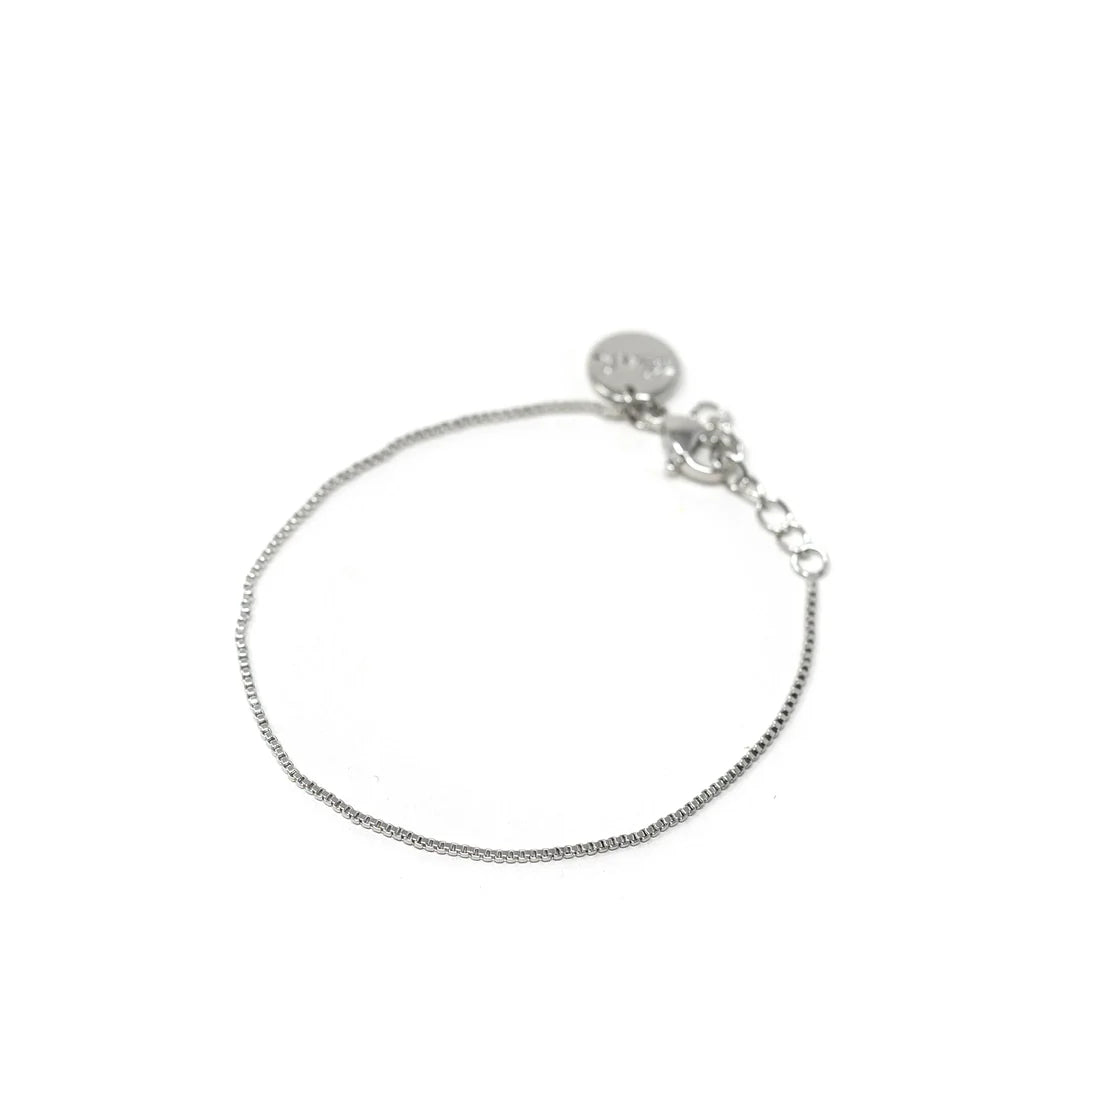 'The Vivian' Dainty Box Chain Bracelet (2 Colors)-Dainty Box Chain Bracelet in Silver & Gold. A must have everyday piece to wear alone or with your stacks!-Cali Moon Boutique, Plainville Connecticut